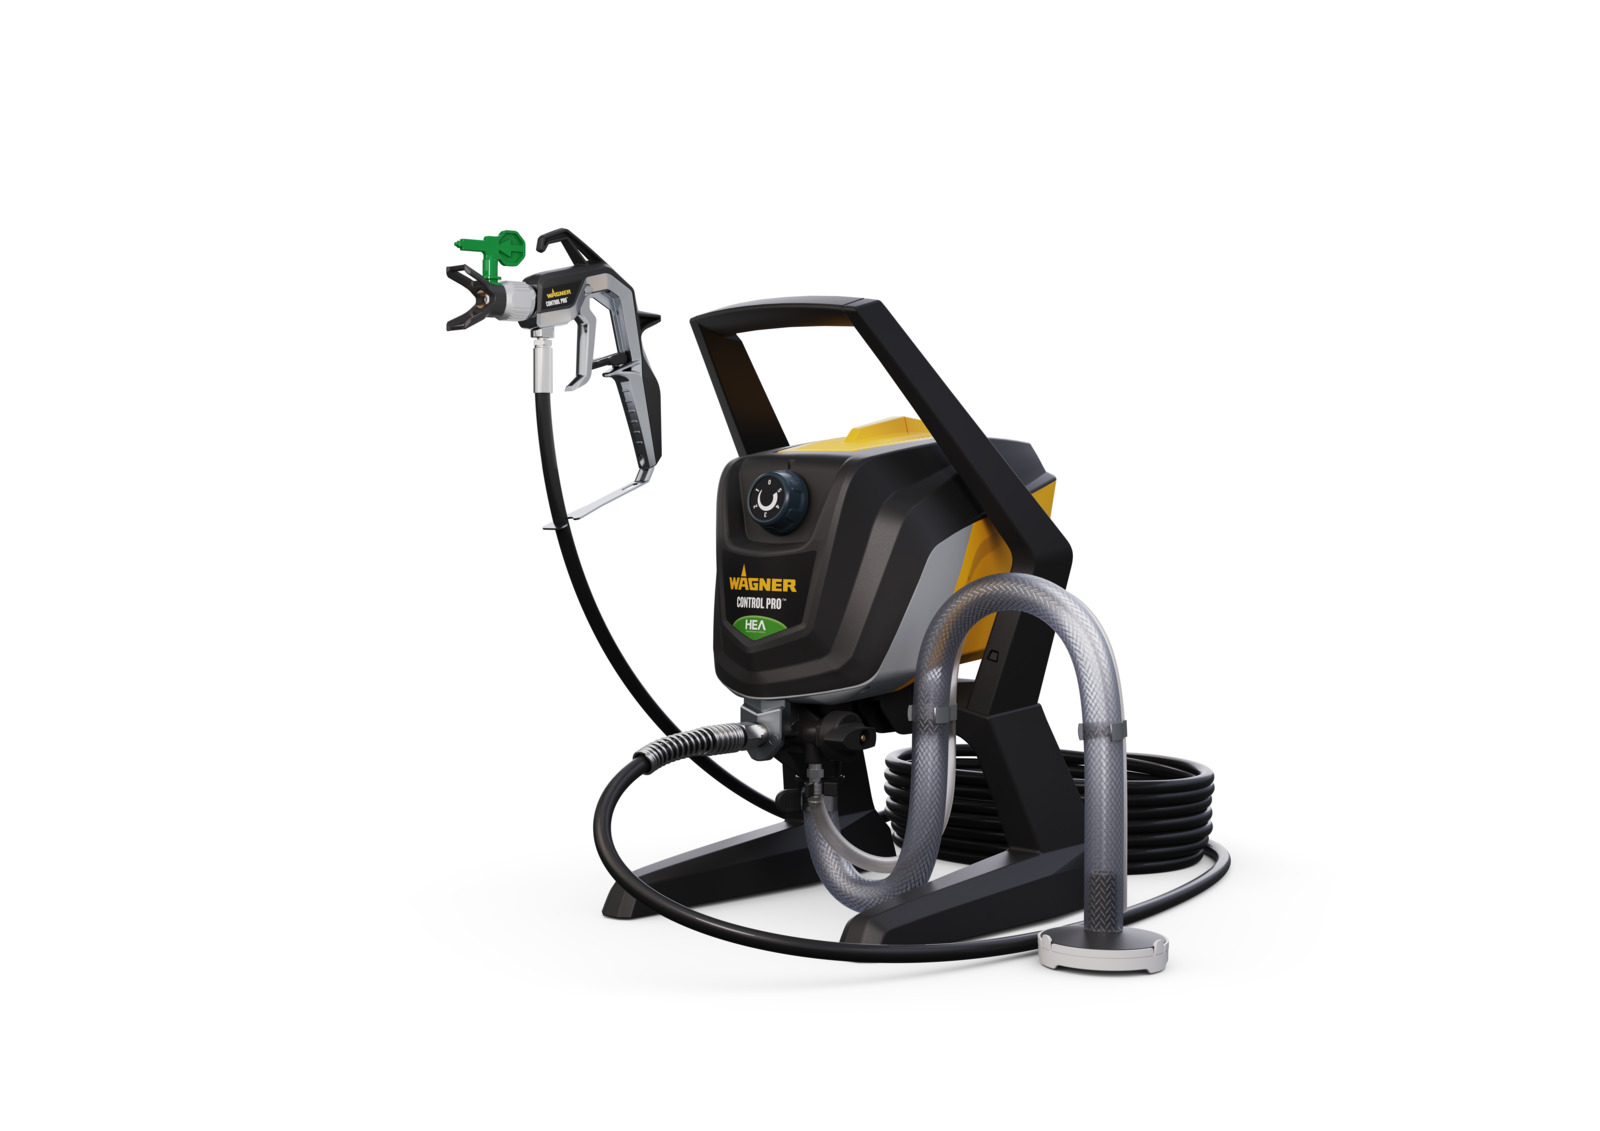 Wagner Control Pro 350 Portable Airless Sprayer, For Industrial